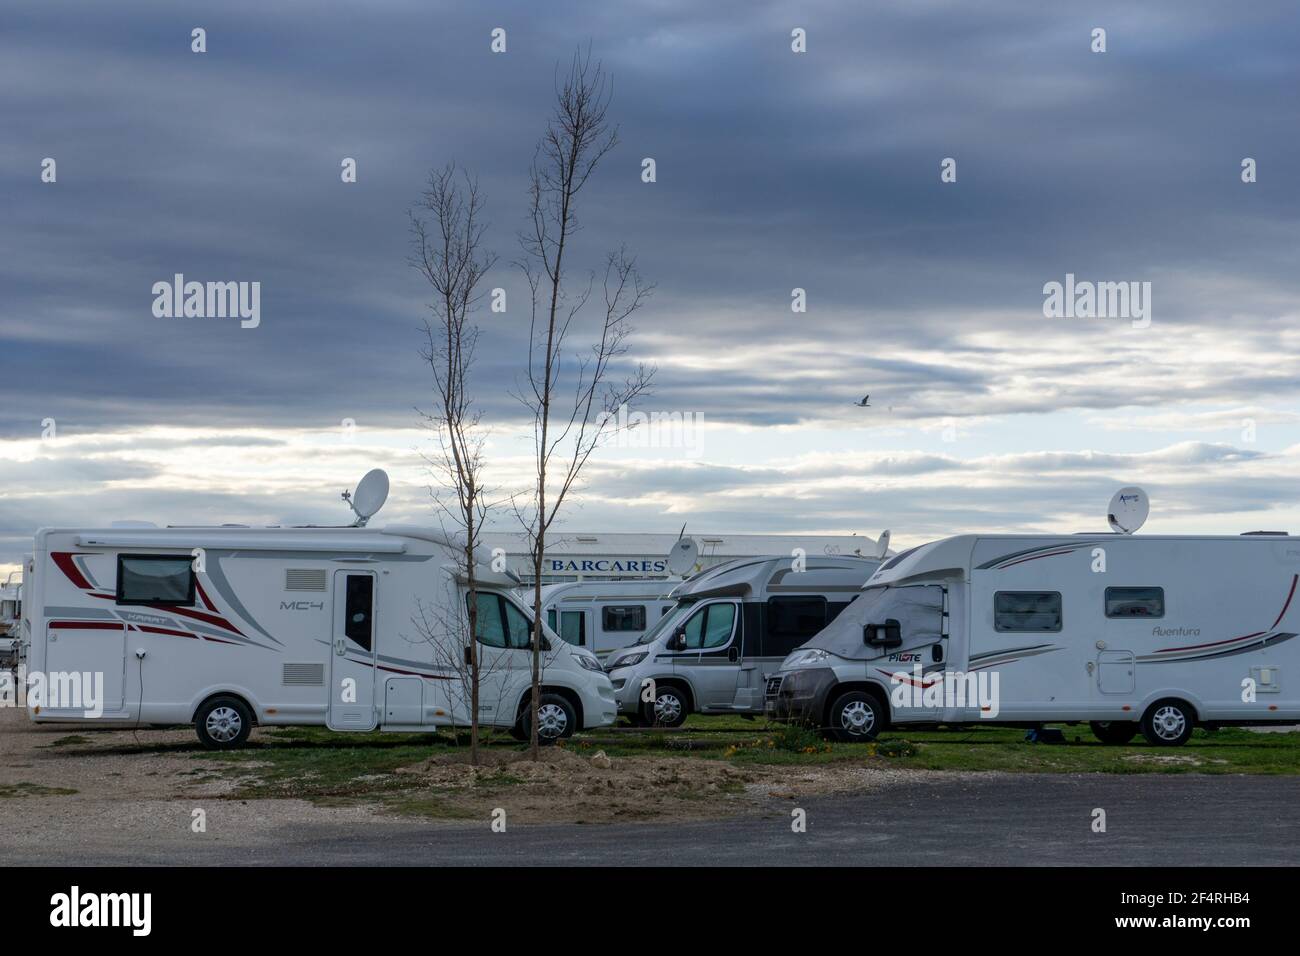 Le Barcares, France - 13 March, 2021: many camper vans and RVs parked in the RV Park in the harbor at Port Barcares under an overcast sky Stock Photo